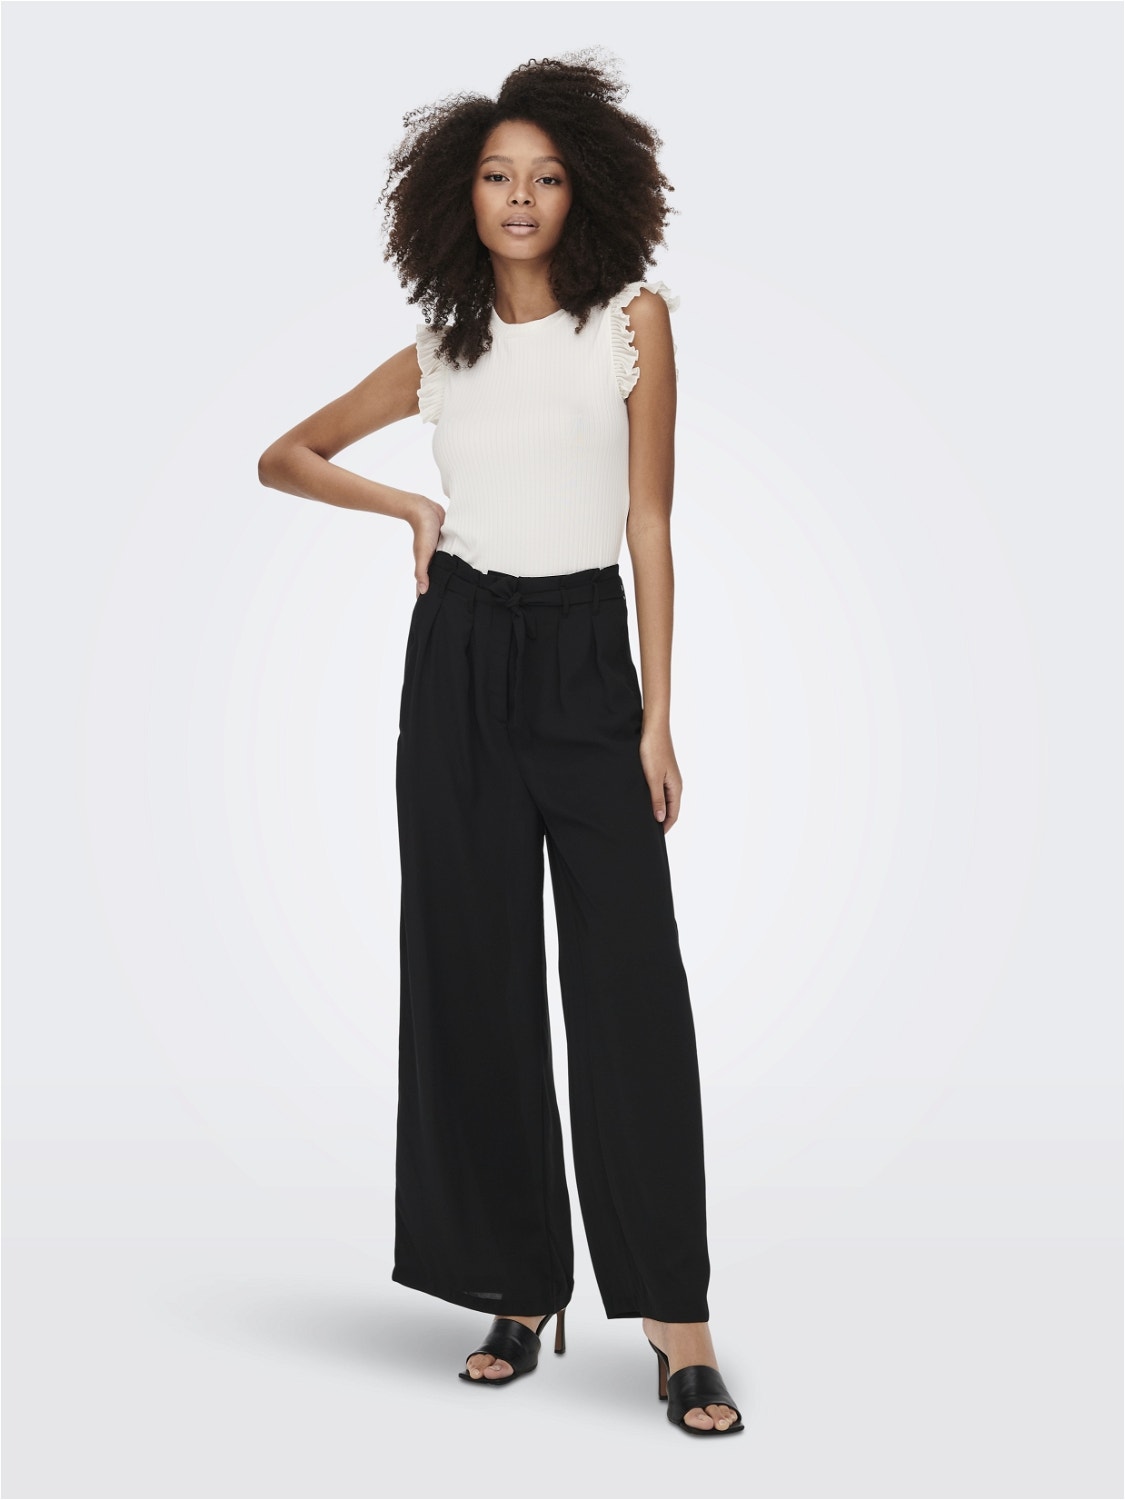 ONLY Regular Fit Trousers -Black - 15242144